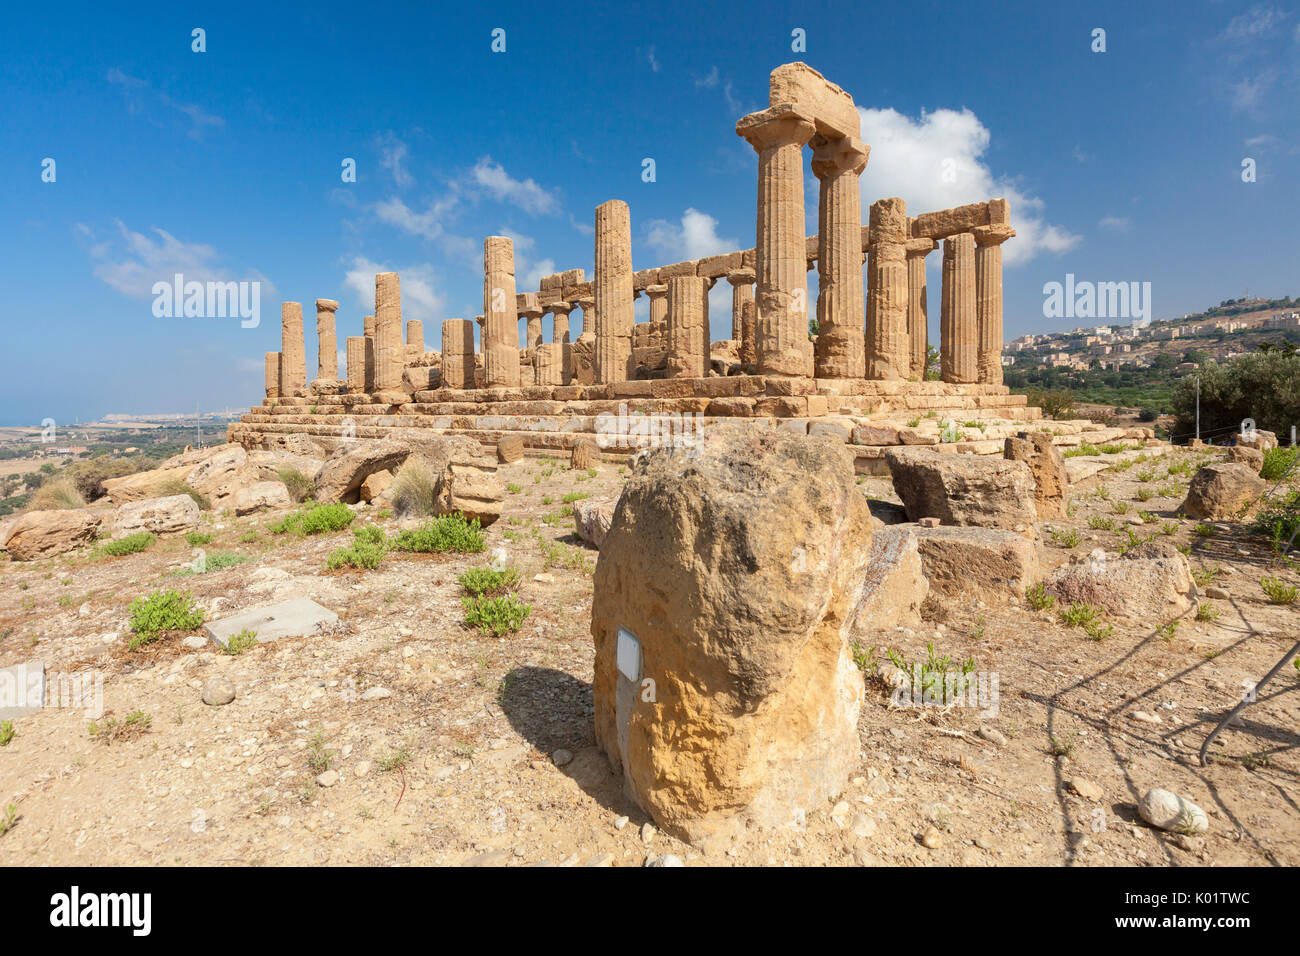 The Temple of Juno a Greek temple of the ancient city of Akragas located in the Valle dei Templi Agrigento Sicily Italy Europe Stock Photo